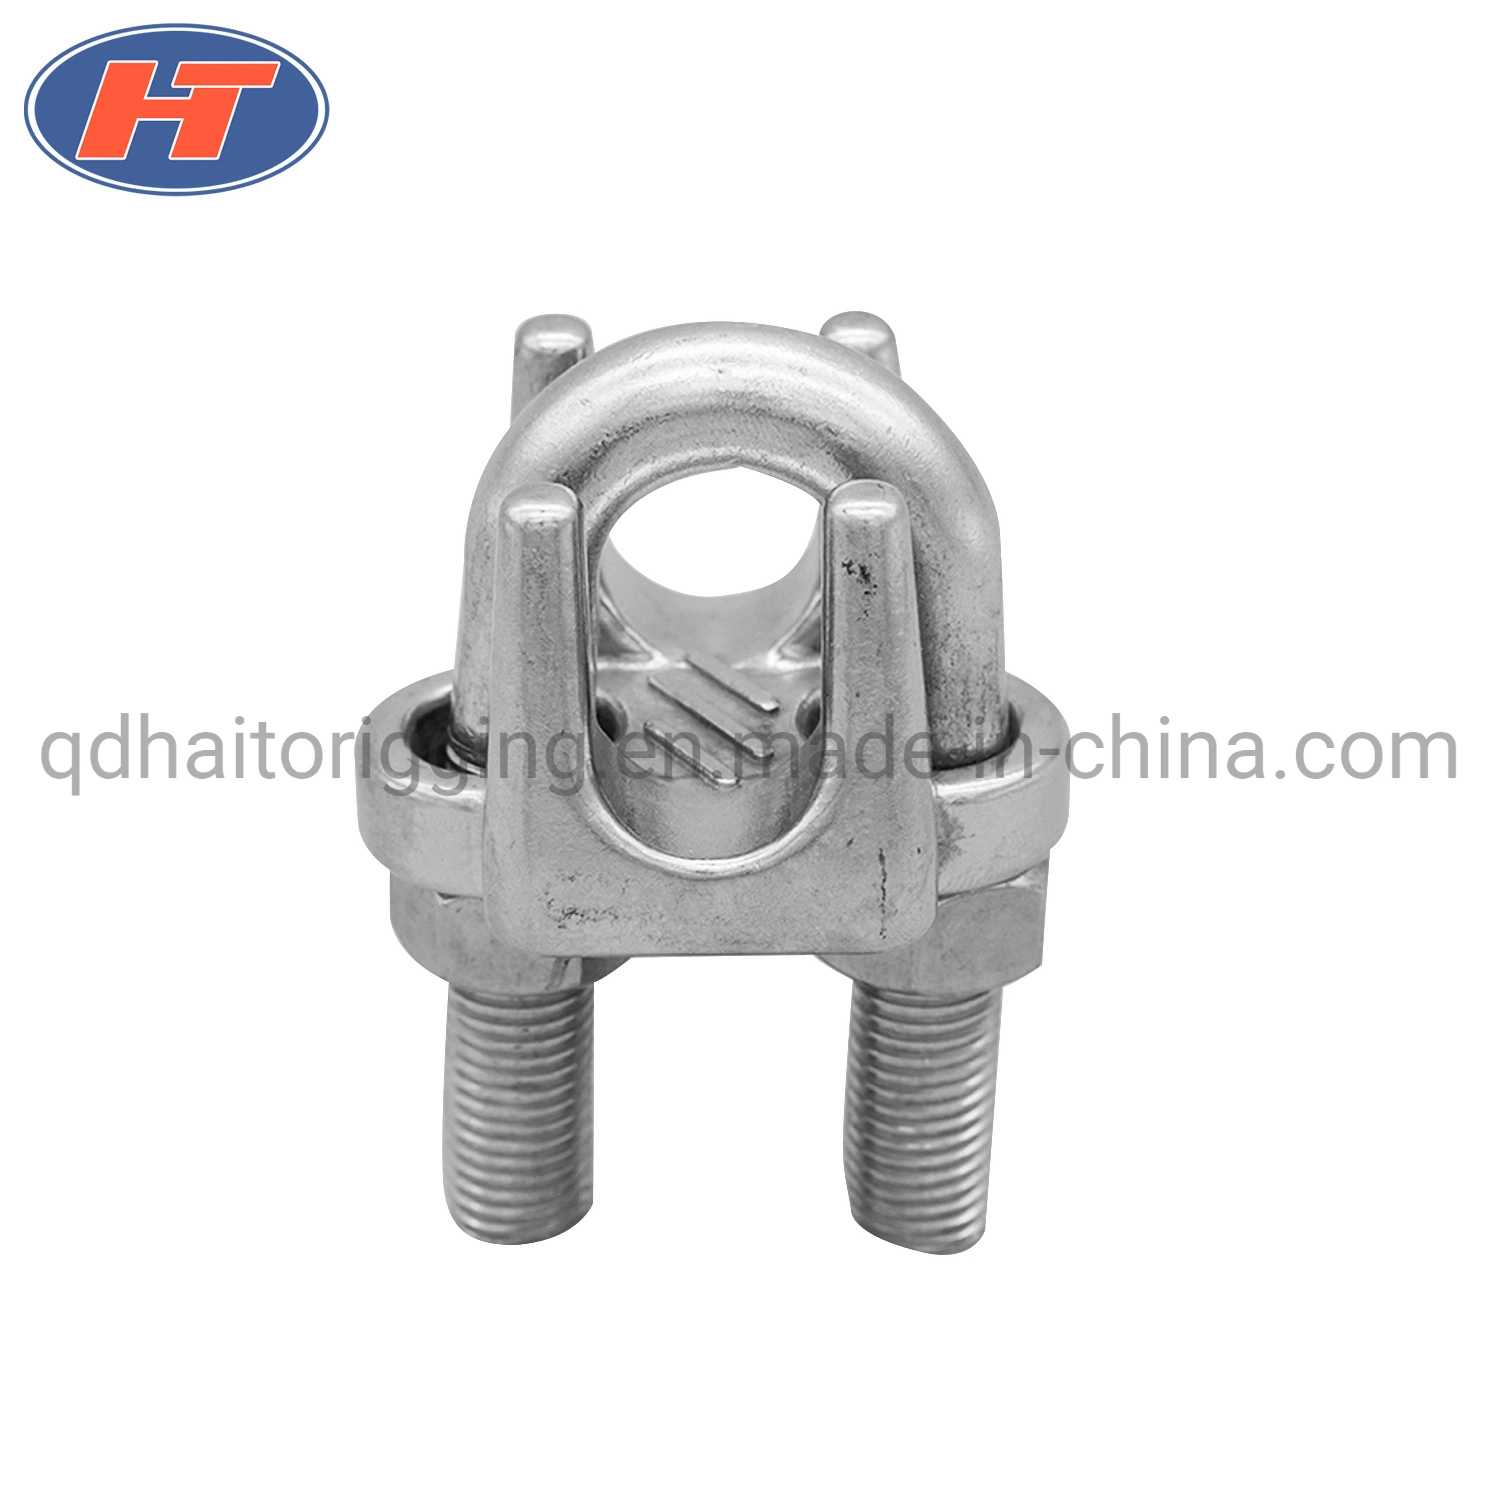 Stainless Steel DIN741 Wire Rope Clip for Cable Usage